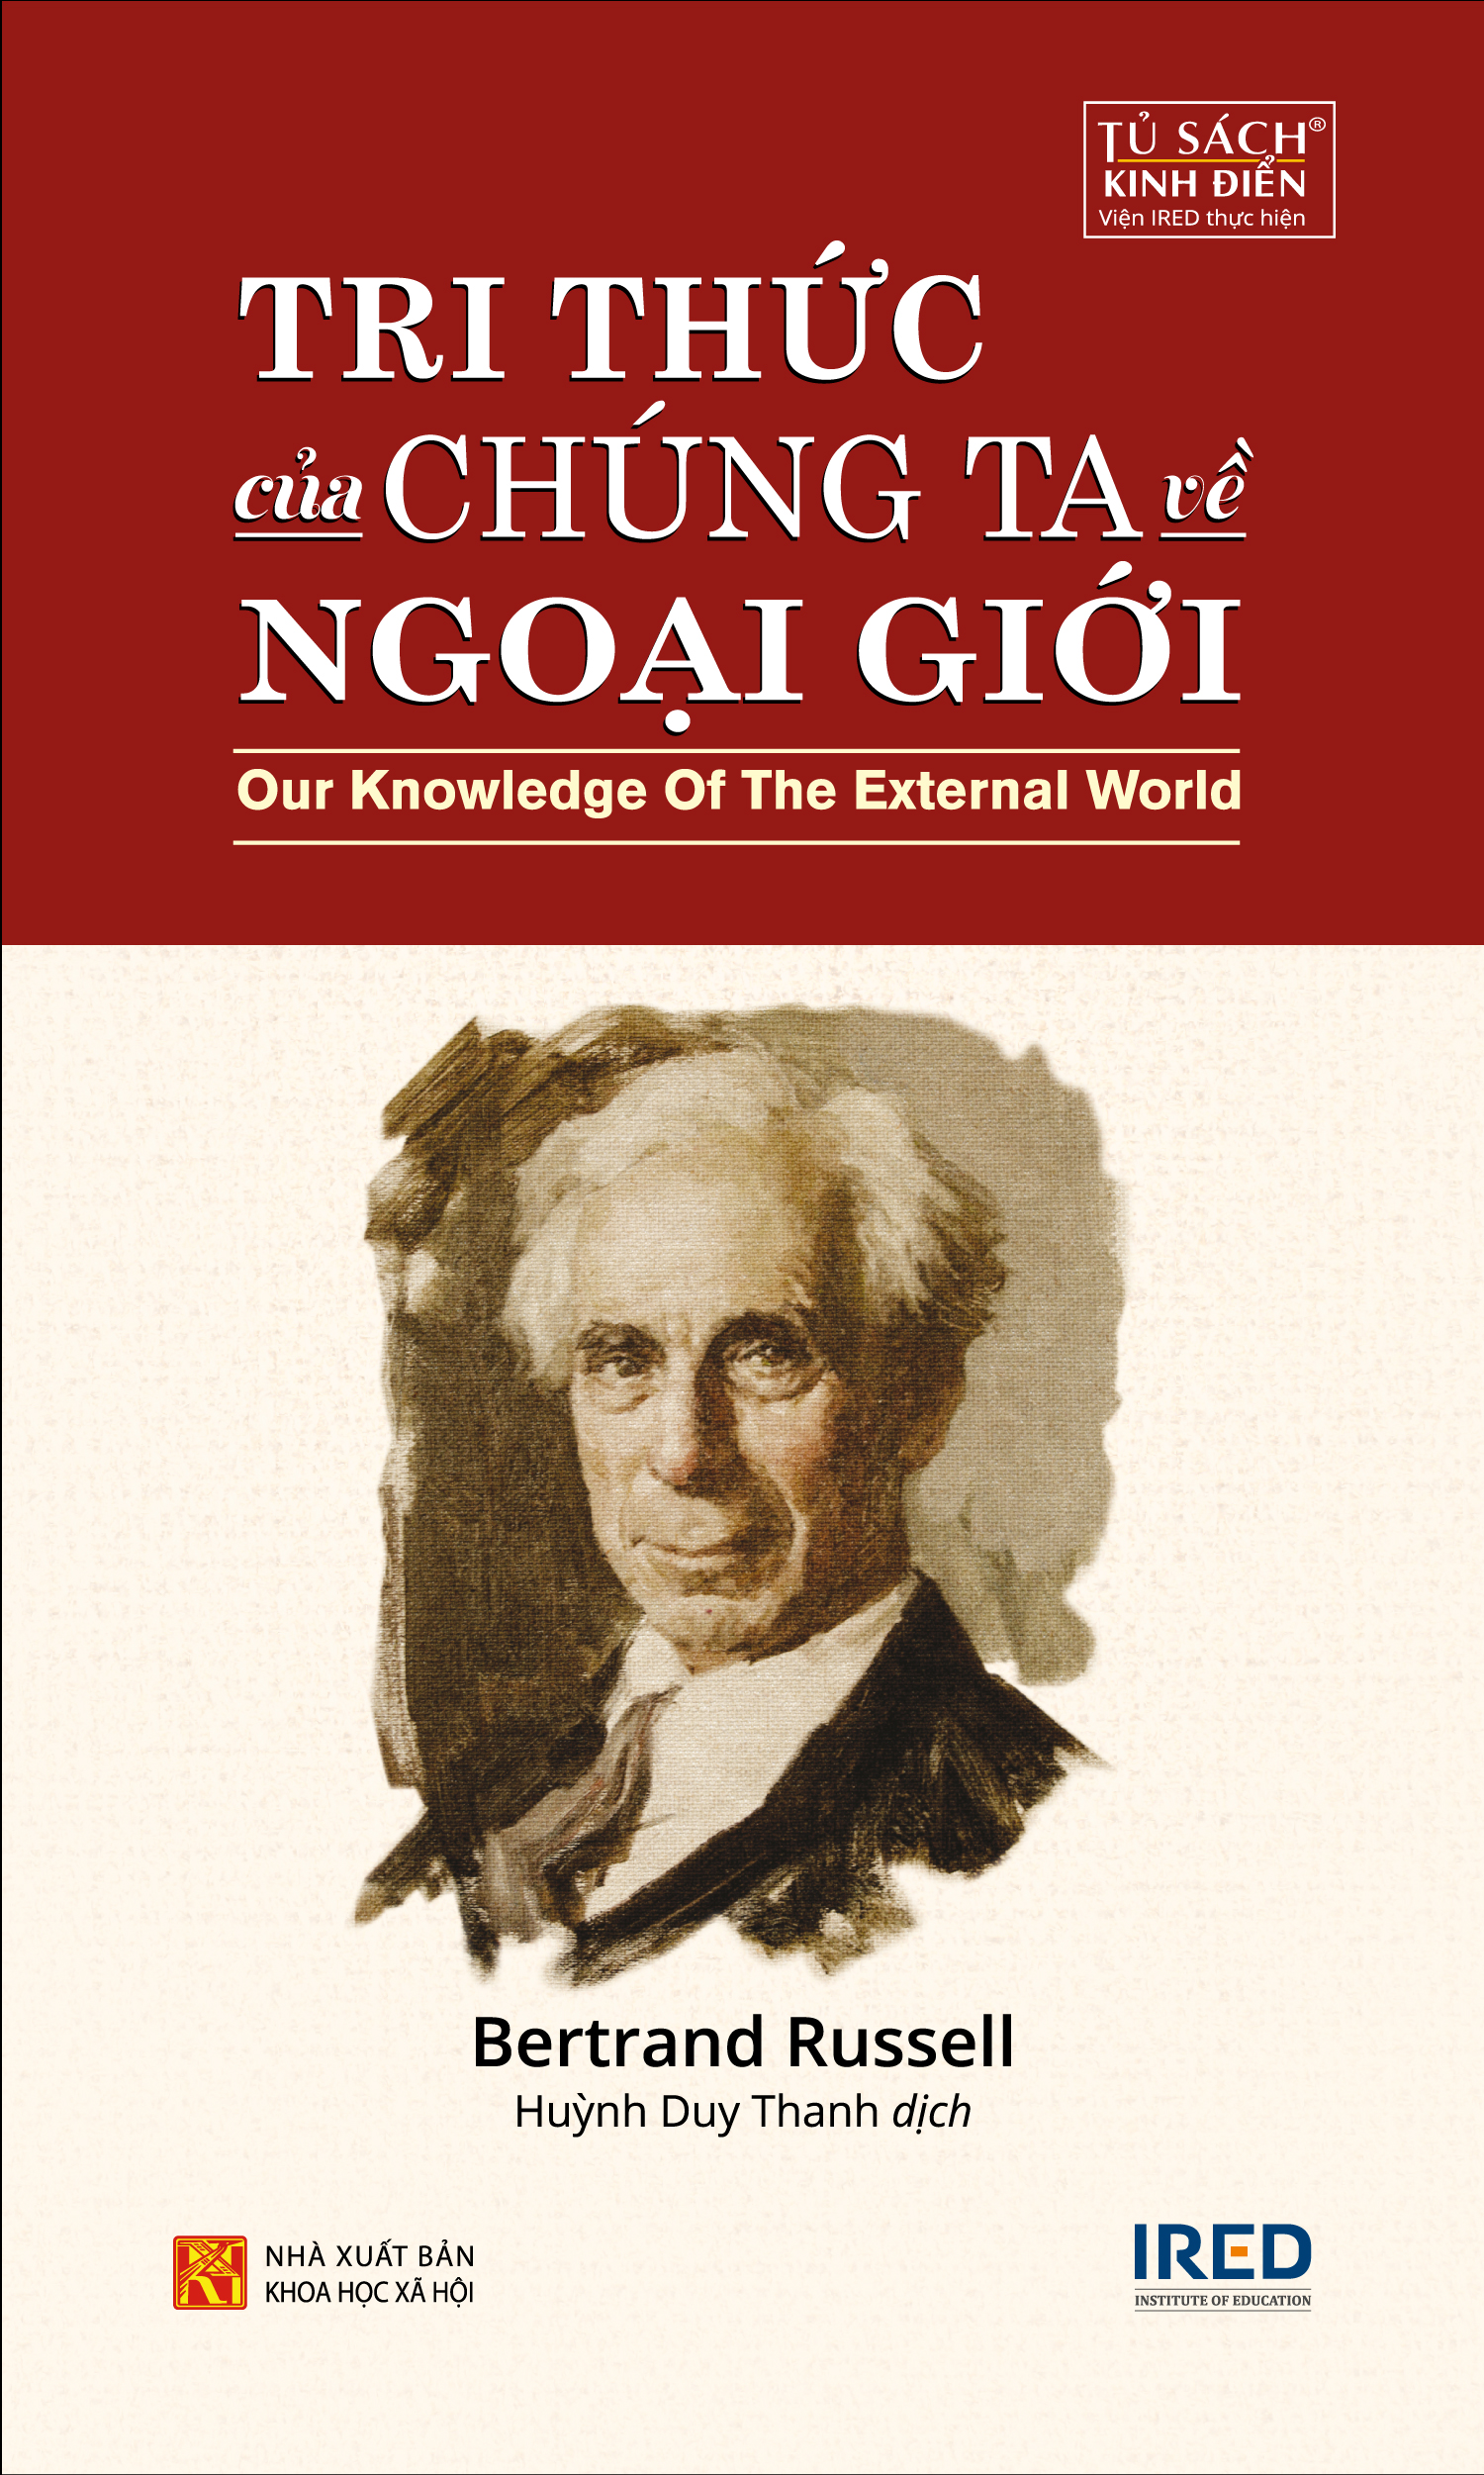 Sách IRED Books - Tri thức của chúng ta về ngoại giới (Our Knowledge of the External World) - Bertrand Russell